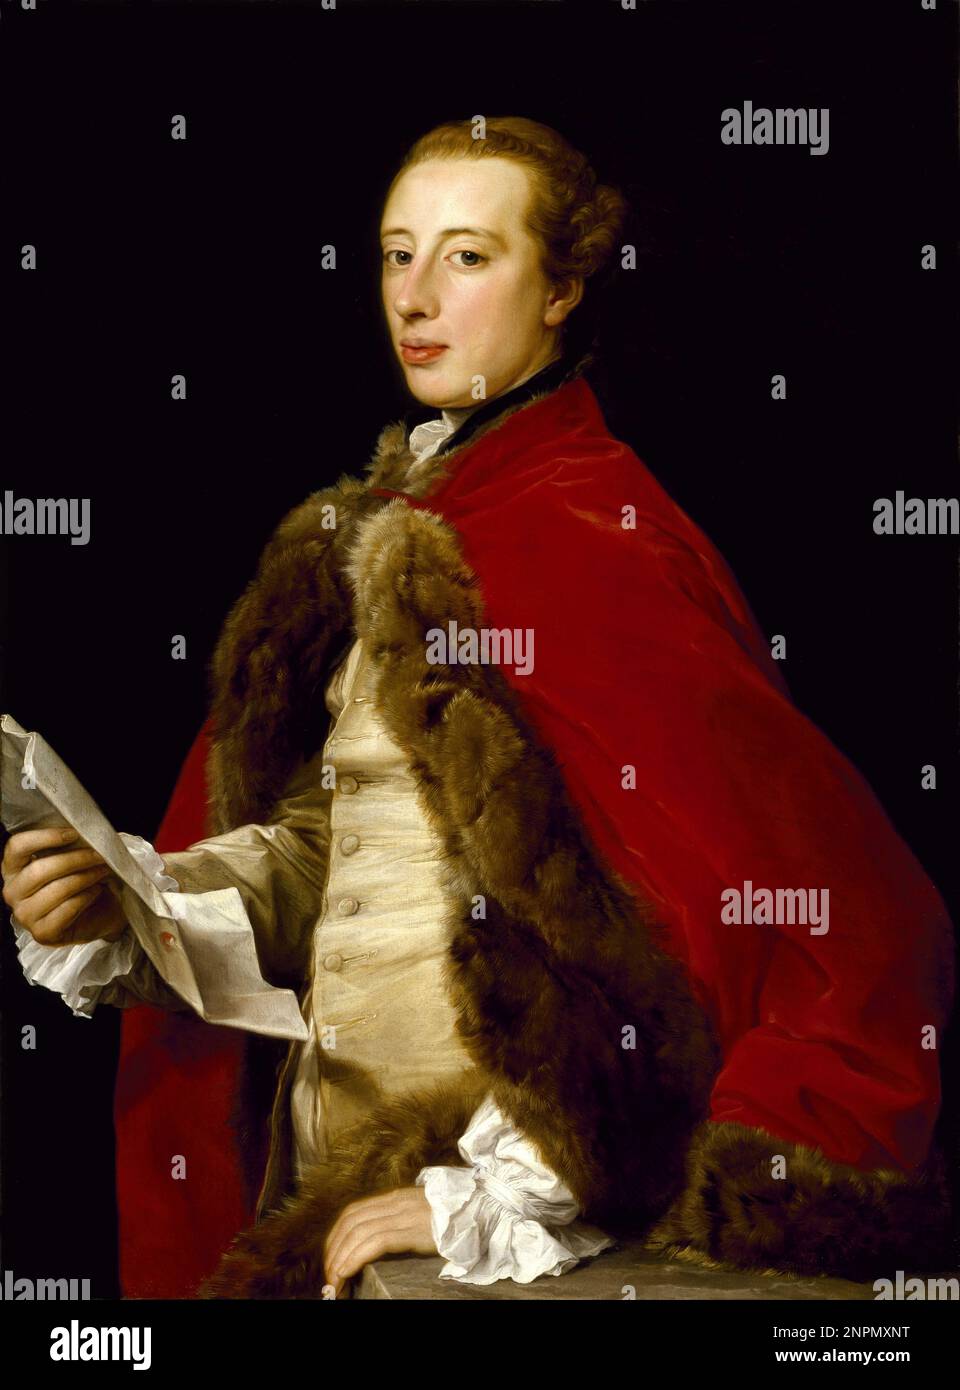 William Fermor, Imperial Russian Army officer best known for leading his country’s army at the Battle of Zorndorf during the Seven Years’ War. Painting by Pompeo Batoni Stock Photo